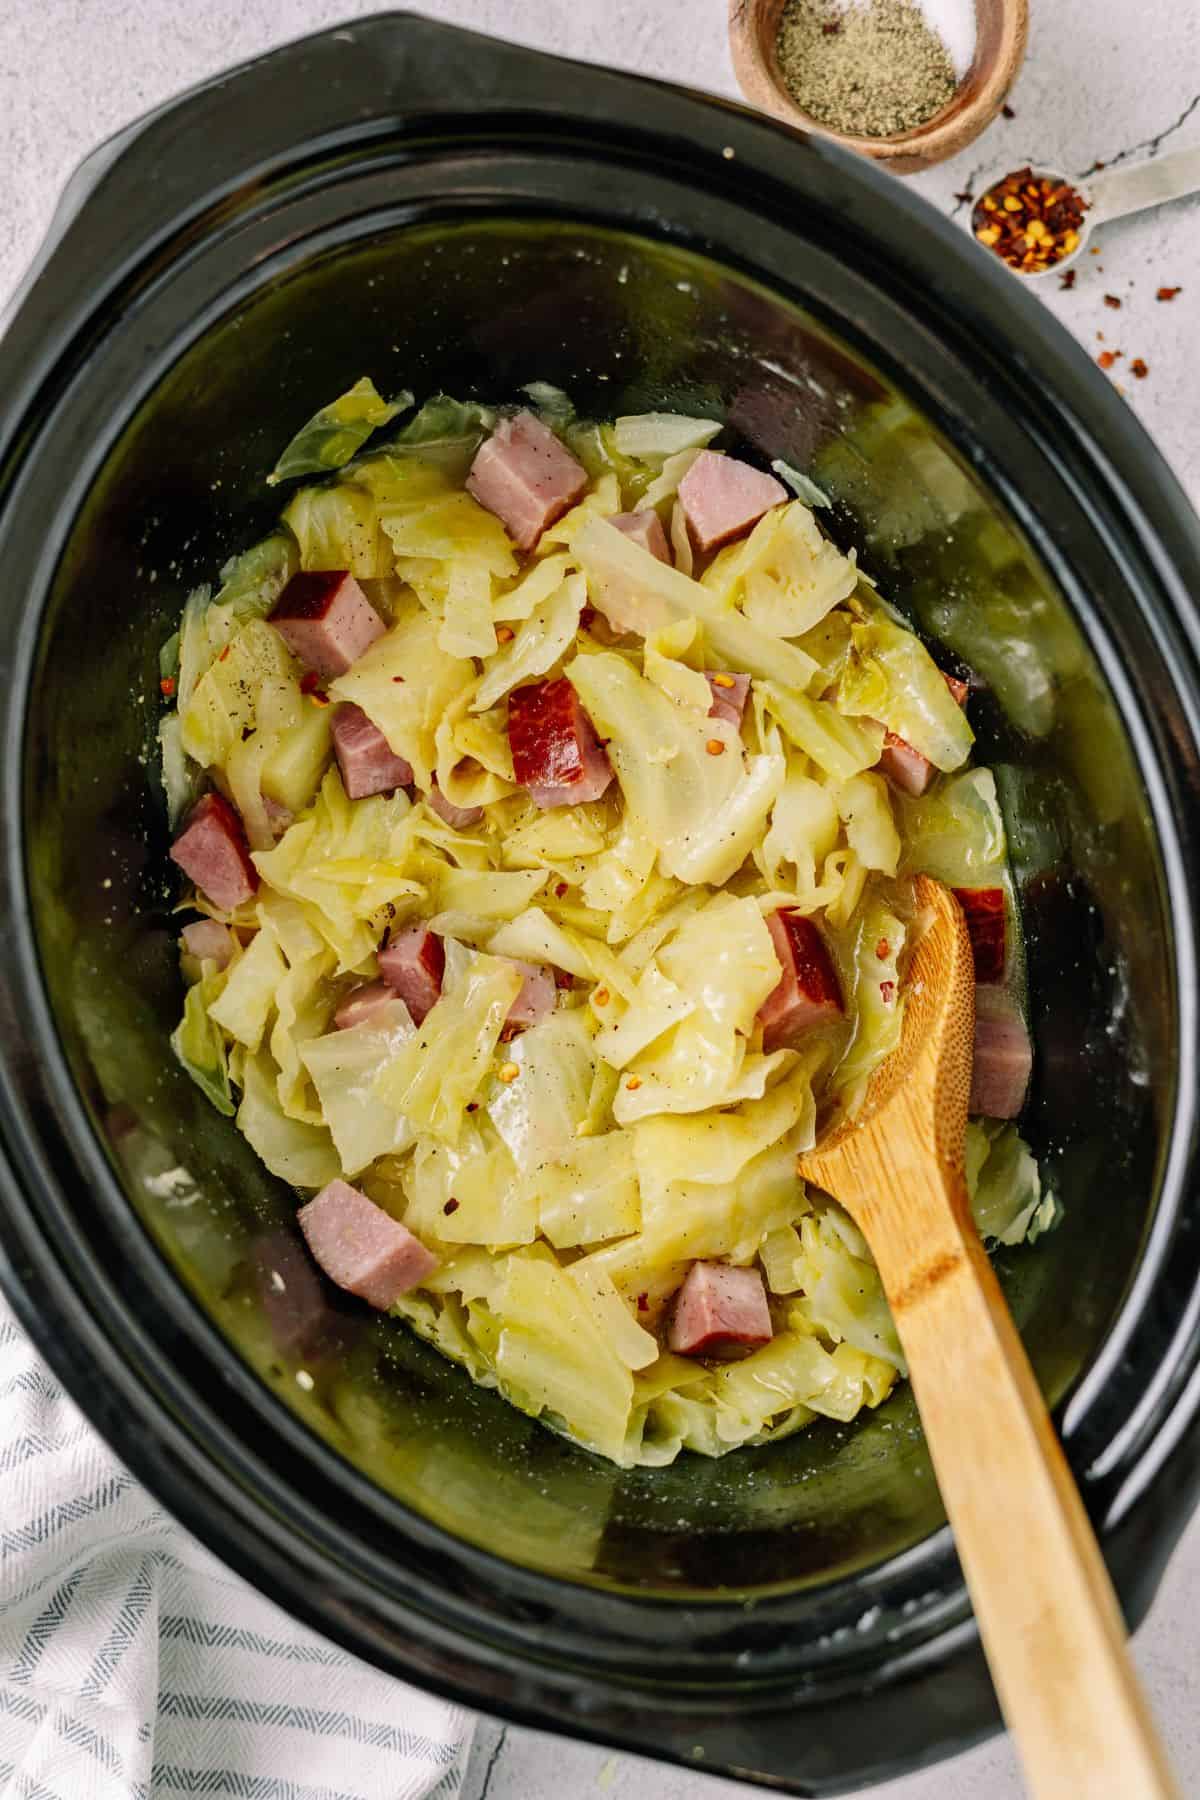 cooking cabbage with ham in a crockpot